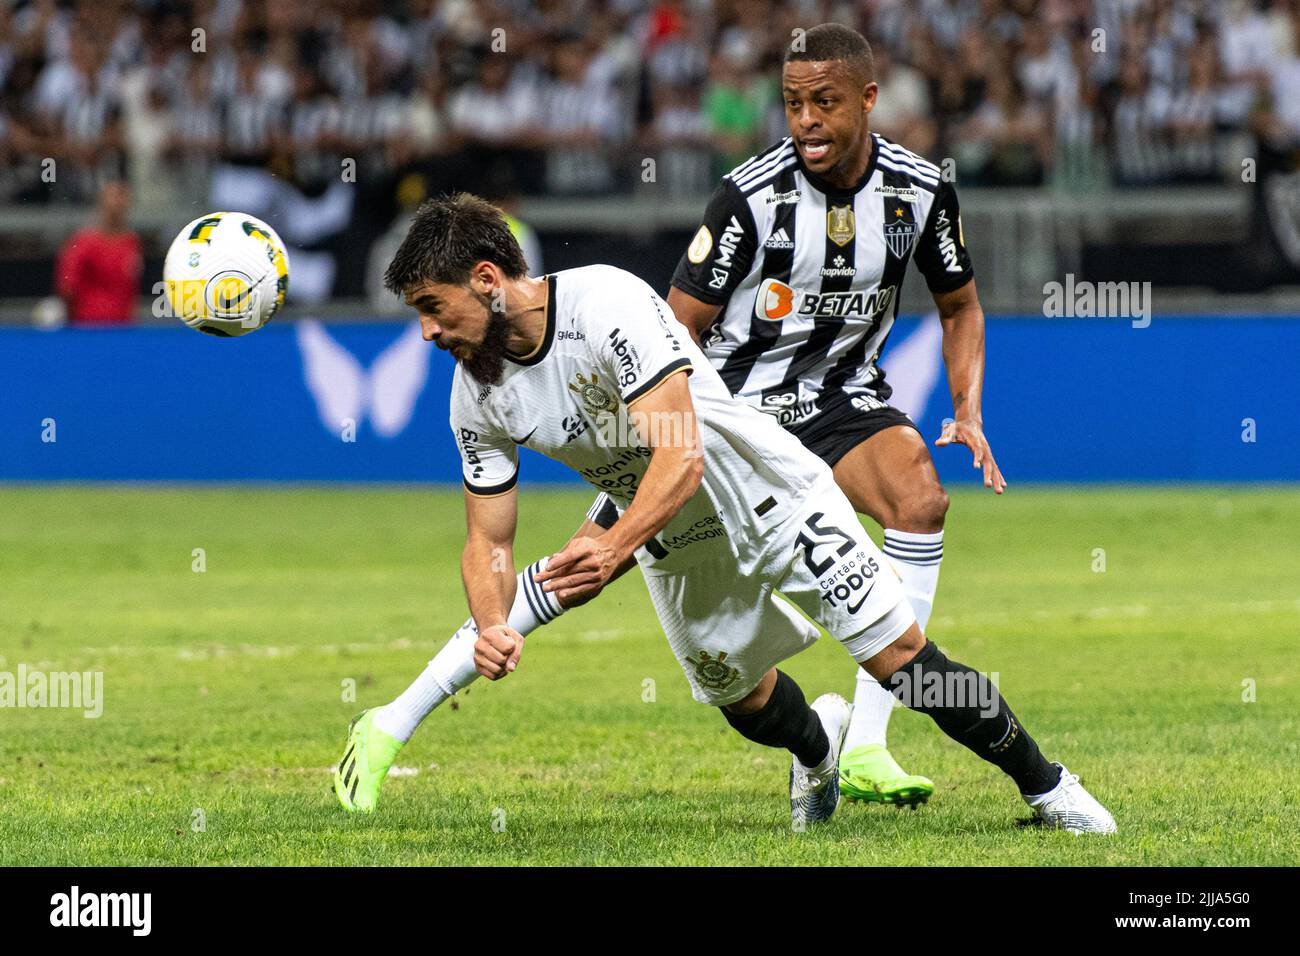 Belo Horizonte, Brazil. 24th July, 2022. MG - Belo Horizonte - 07/24/2022 - BRAZILIAN A 2022 ATLETICO -MG X CORINTHIANS - Mandez player for Corinthians during a match against Atletico-MG at the Mineirao stadium for the Brazilian championship A 2022. Photo: Alessandra Torres/AGIF/Sipa USA Credit: Sipa USA/Alamy Live News Stock Photo